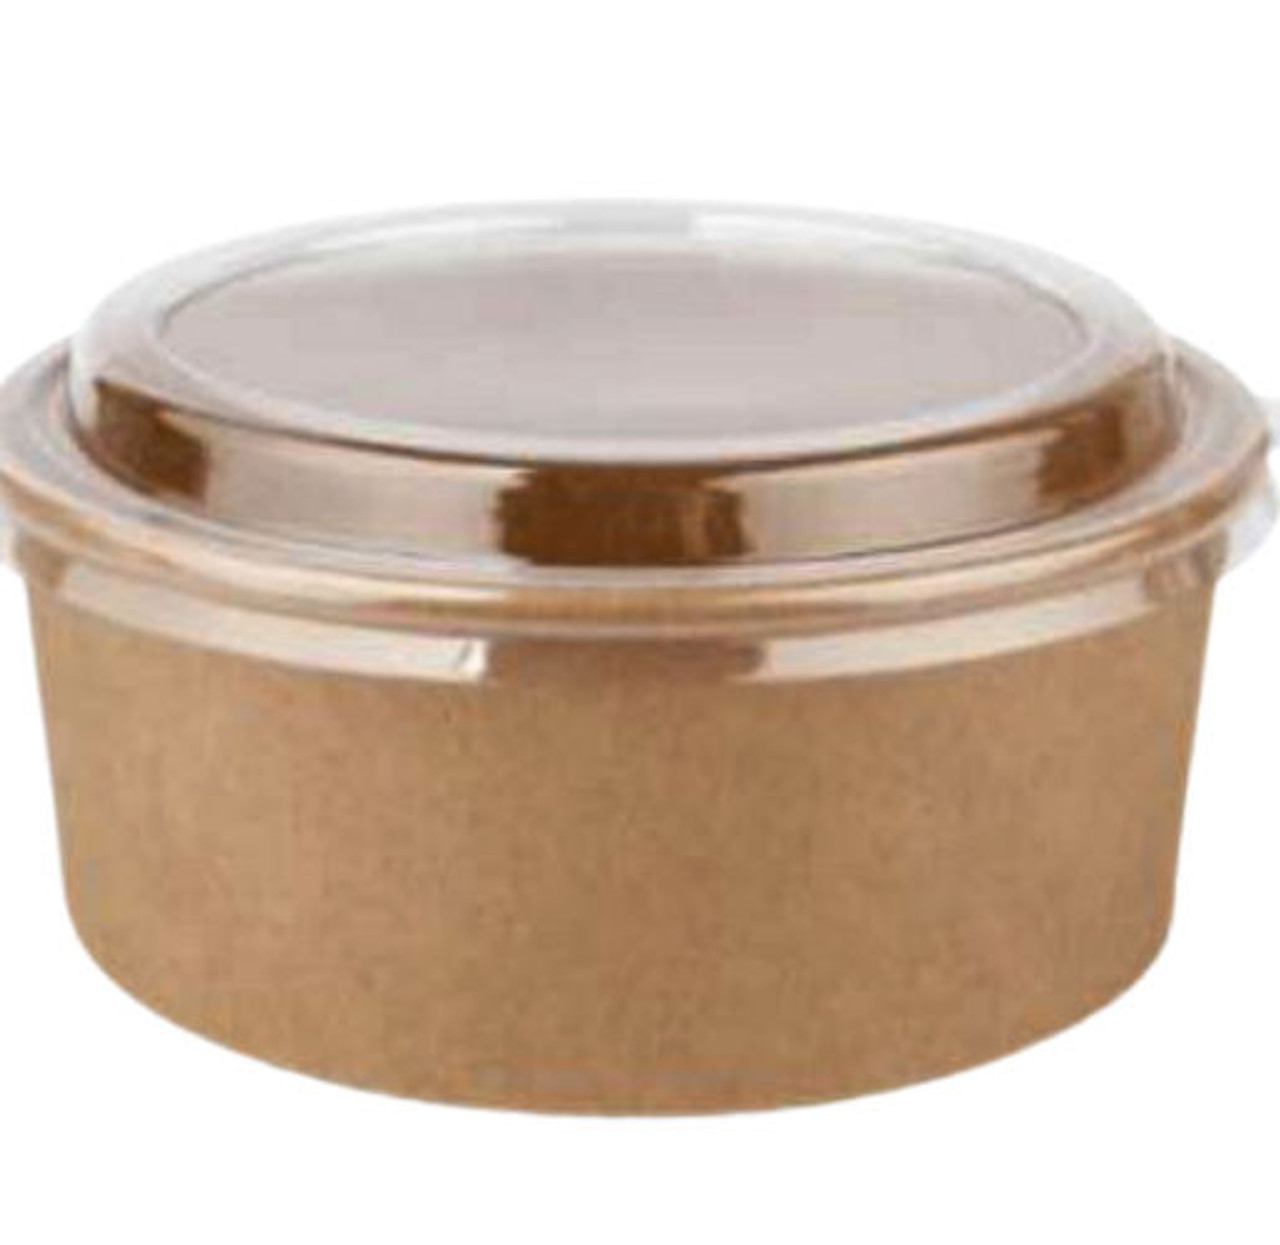 Kraft Extra Large 1300ml Food Tubs with 100% Clear Recyclable Lid ( see qty options )